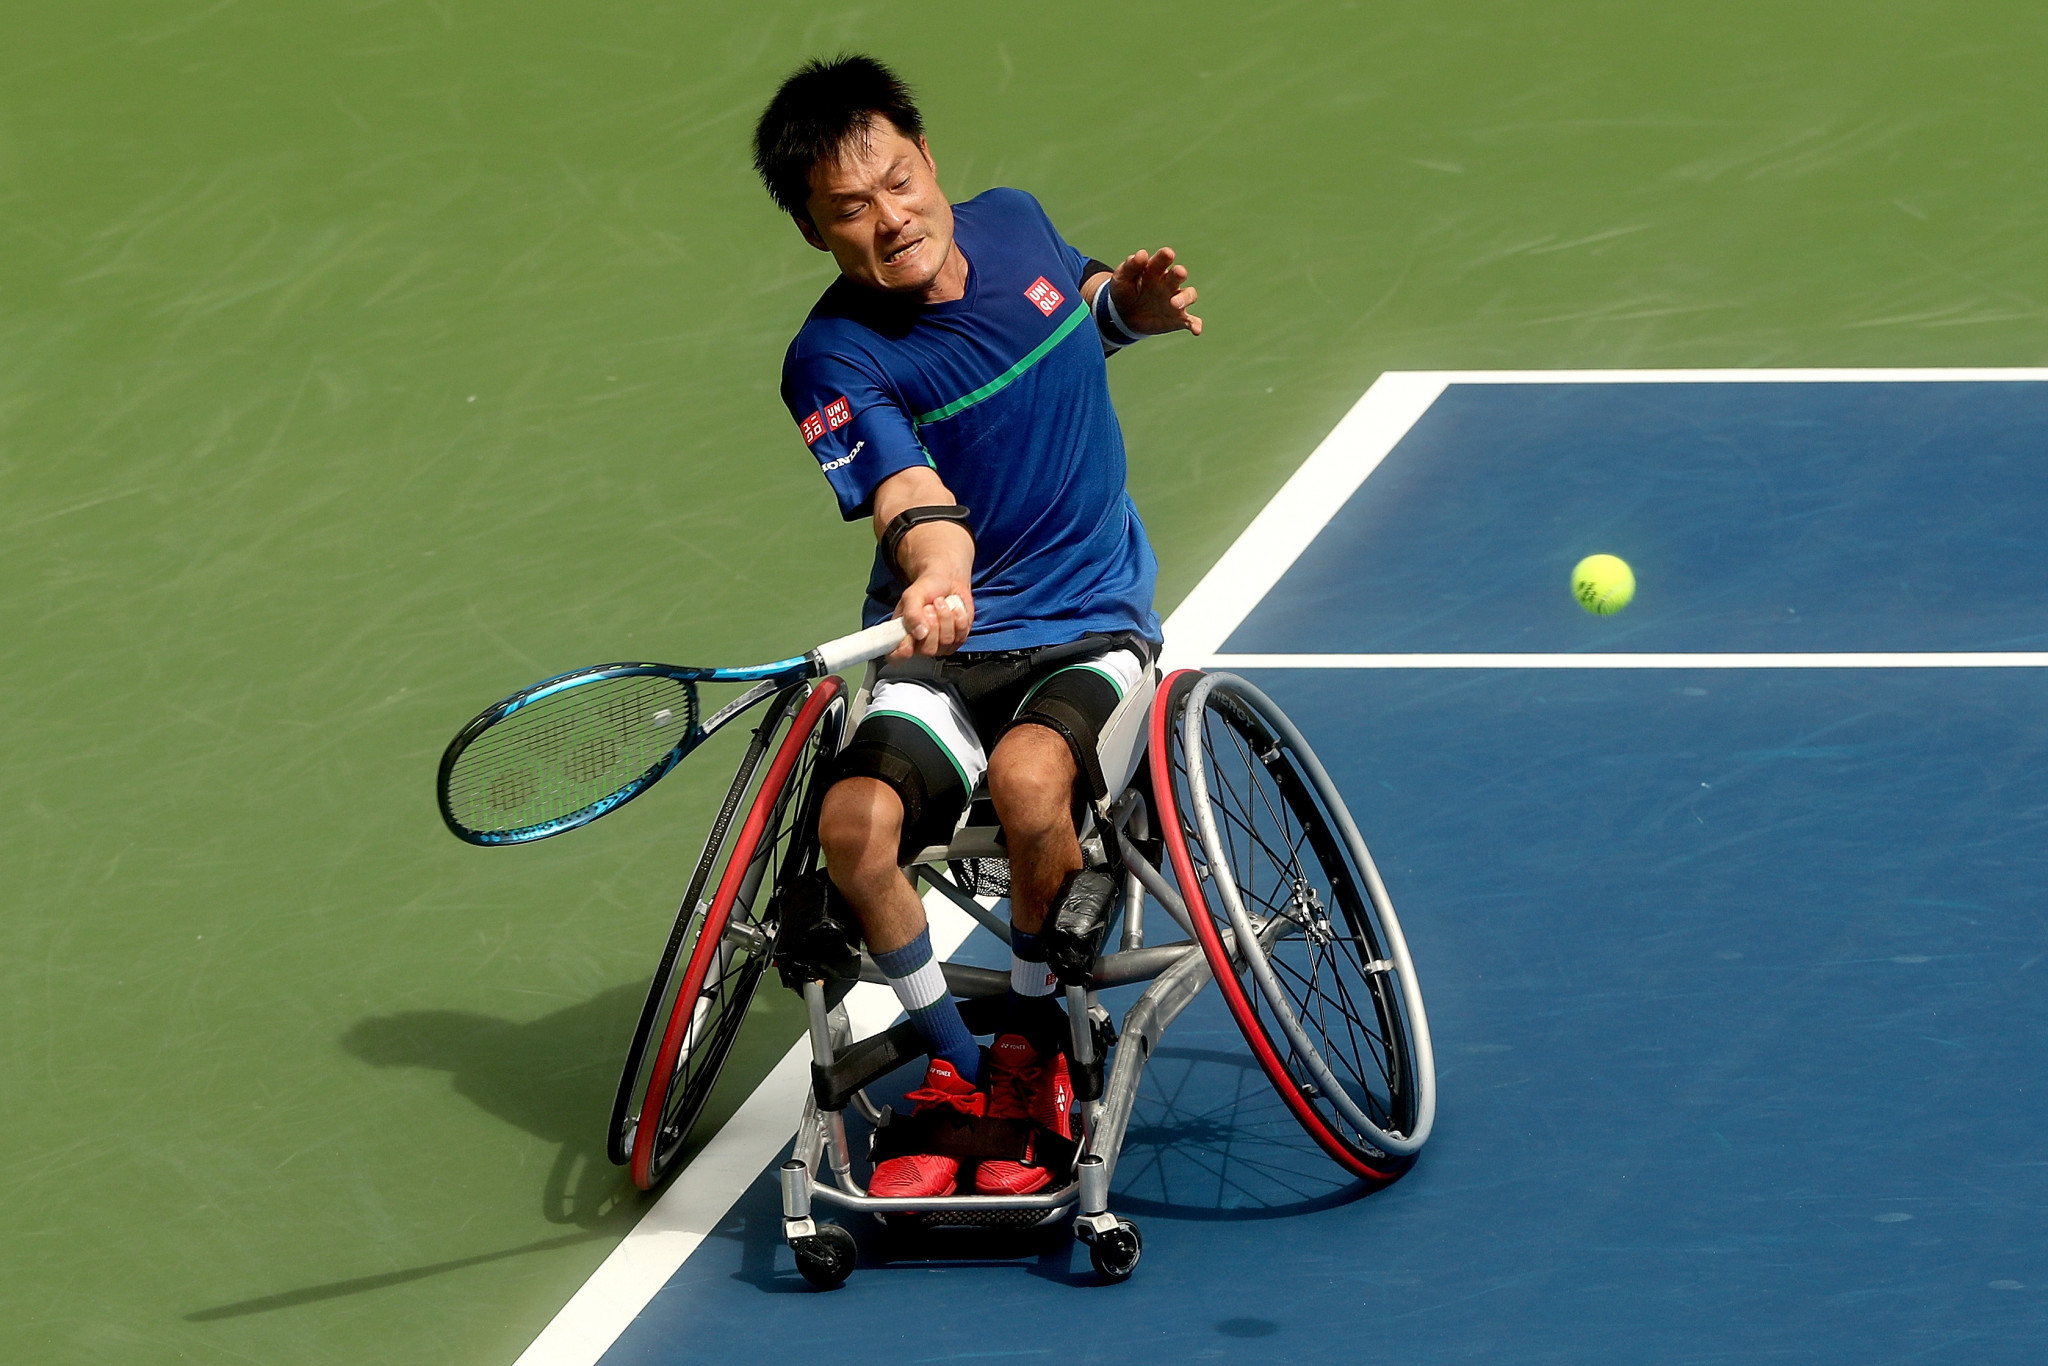 Top seeds battle to three-set wins as US Open wheelchair tennis competitions continue